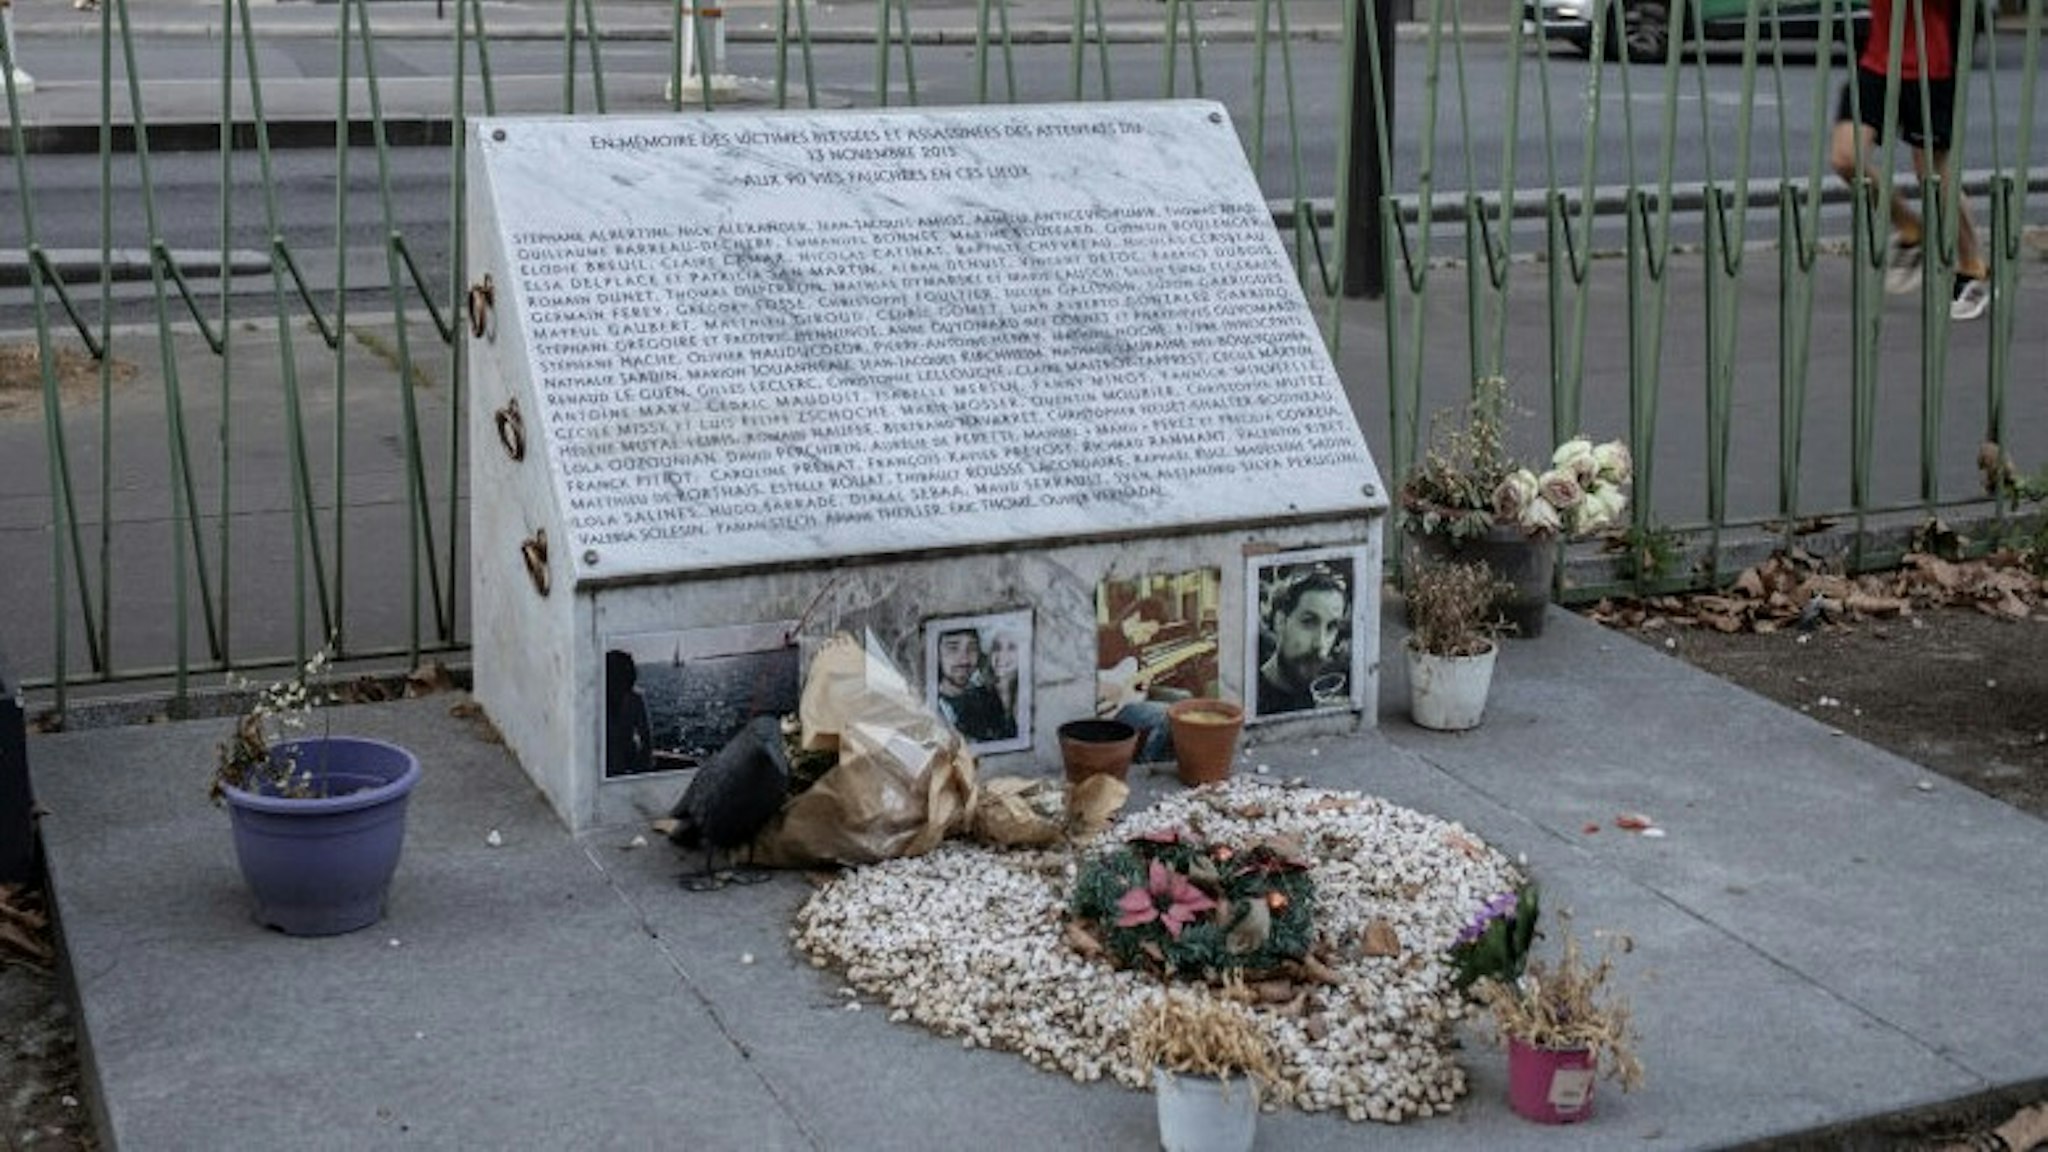 Trial To Begin For November 2015 Attacks, Which Killed 130 PARIS, FRANCE - SEPTEMBER 07: Pictures adorn the memorial plaque for the victims of the November 2015 terror attacks near the Bataclan Theatre and Cafe on September 7, 2021 in Paris, France. In November 2015, three teams of jihadists launched a suicide-bombing and gun assault on bars, restaurants and the Bataclan concert hall, killing 130. Tomorrow is the first day of what is scheduled to be a nine-month trial over these attacks, with 14 of 20 defendants present, including the sole surviving attacker. The Islamic State claimed responsibility for the attacks, which were allegedly planned from Syria. (Photo by Siegfried Modola/Getty Images) Siegfried Modola / Stringer via Getty Images